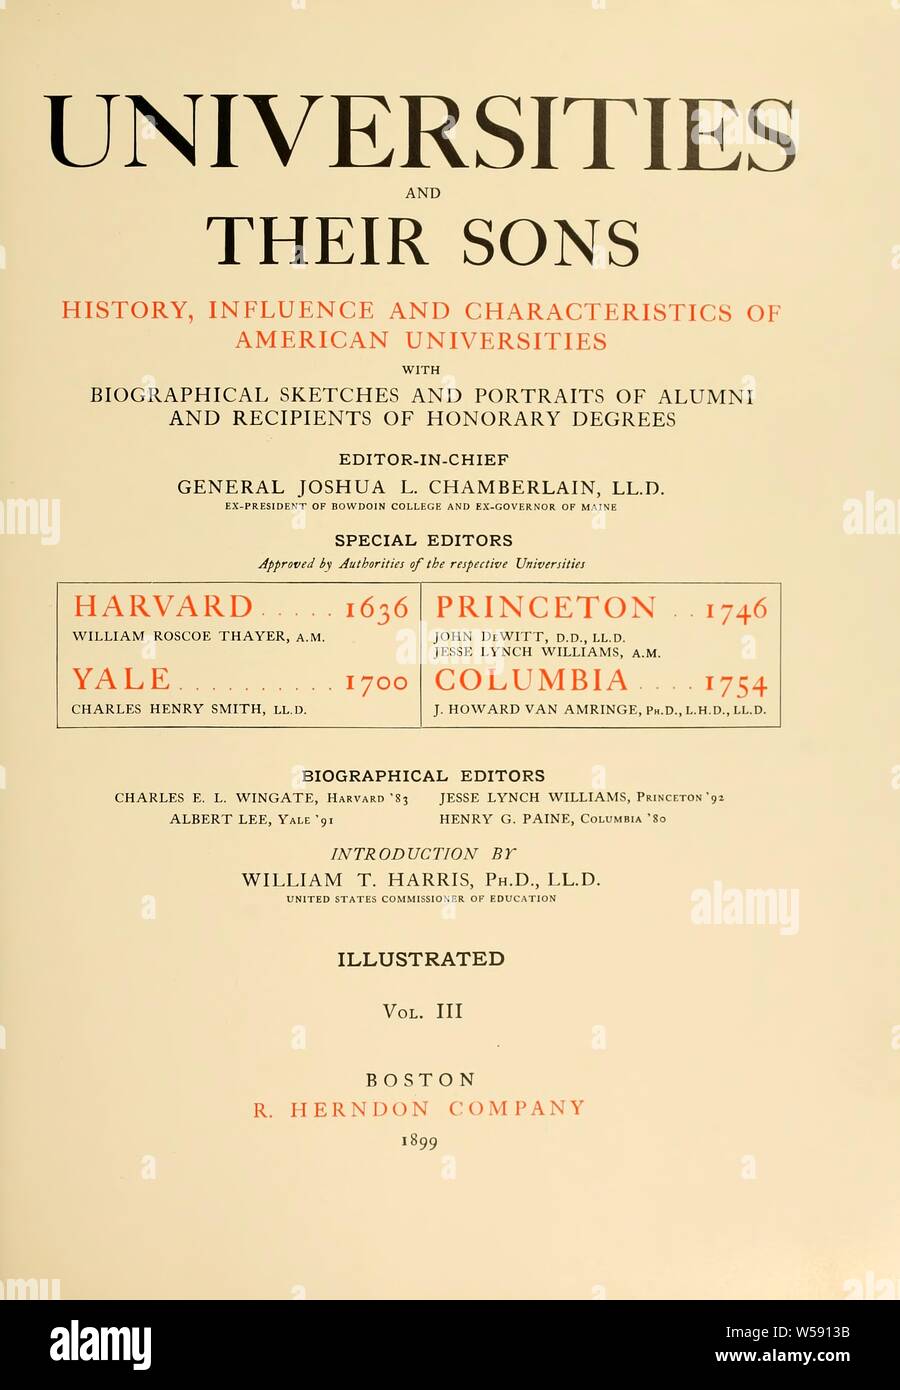 Universities and their sons; history, influence and characteristics of American universities, with biographical sketches and portraits of alumni and recipients of honorary degrees : Chamberlain, Joshua Lawrence, 1828-1914. ed Stock Photo